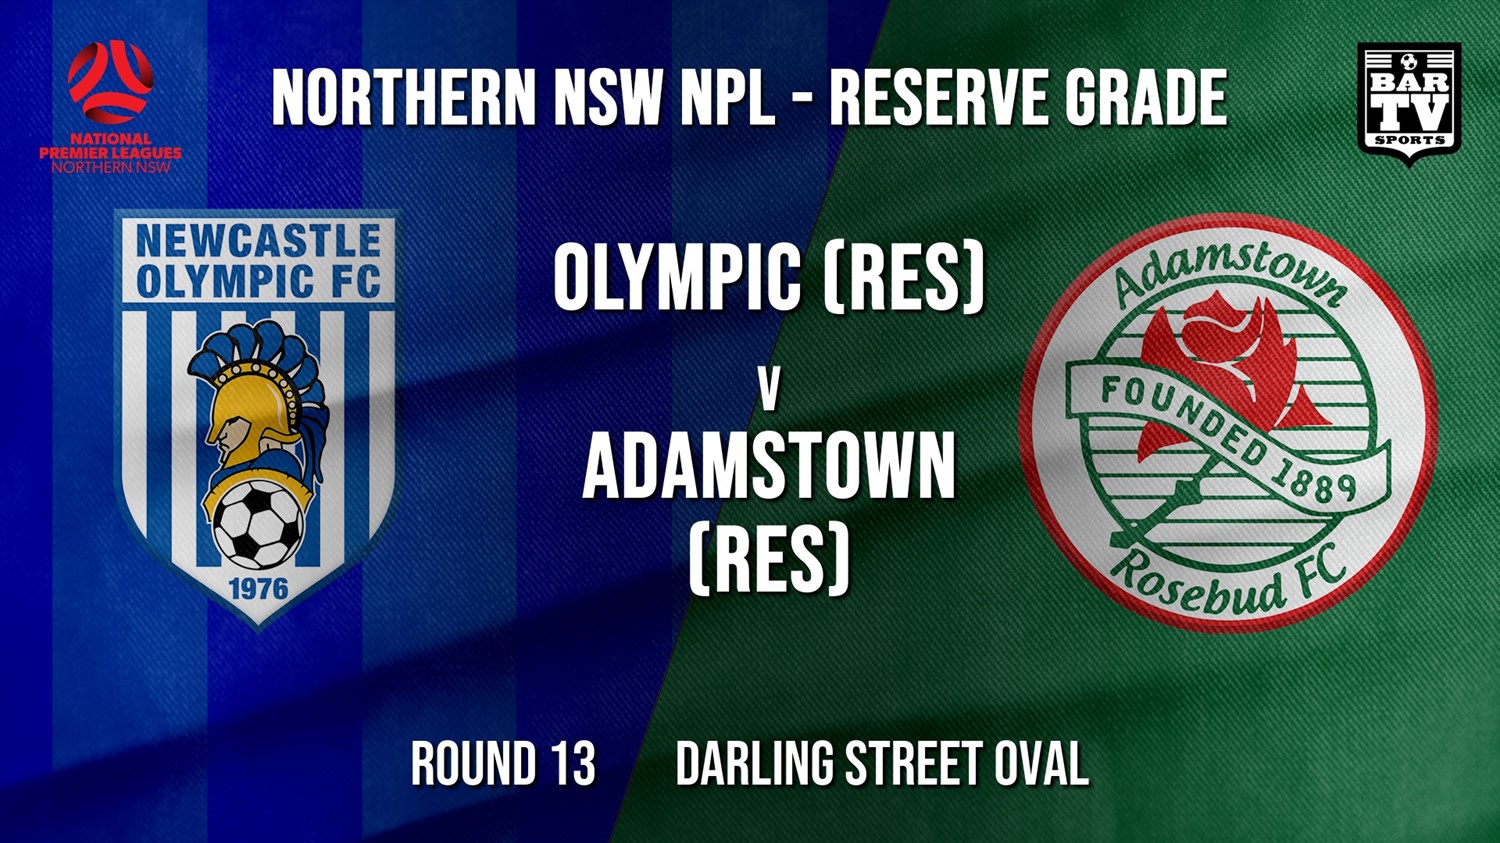 NPL NNSW RES Round 13 - Newcastle Olympic (Res) v Adamstown Rosebud FC (Res) Minigame Slate Image